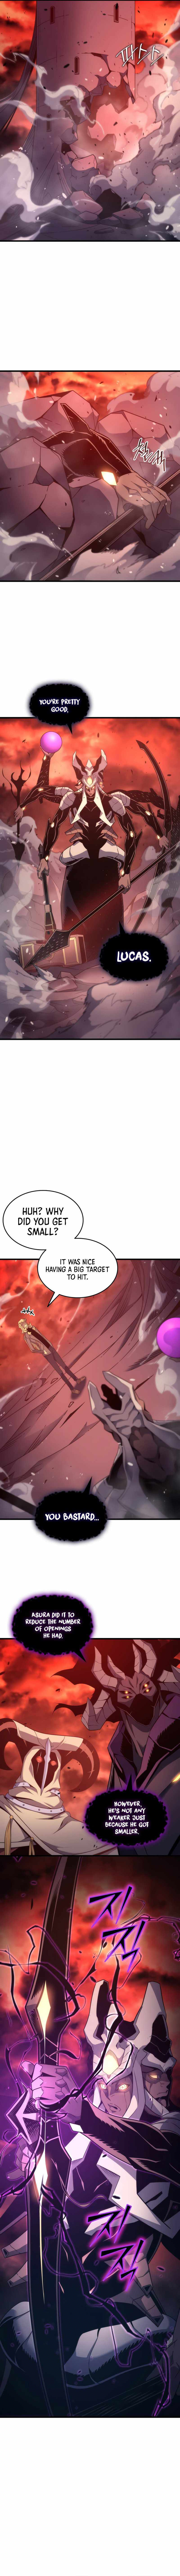 The Great Mage Returns After 4000 Years Chapter 185-eng-li - Page 2